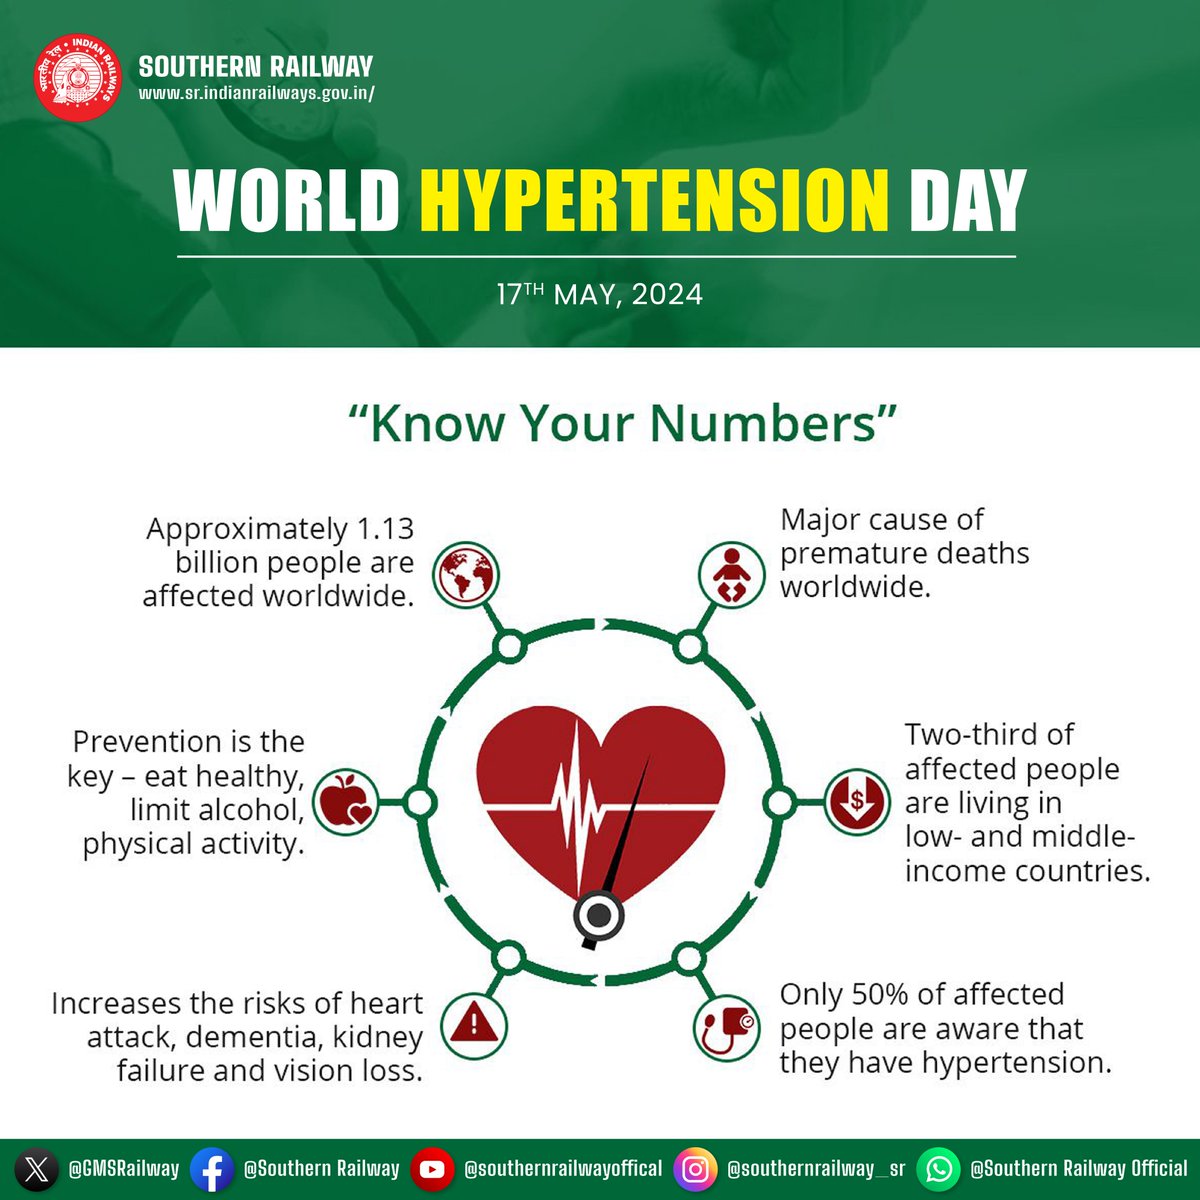 Educate and raise awareness on #WorldHypertensionDay! Know your numbers and take steps to manage your blood pressure for a healthier life. #HealthAwareness